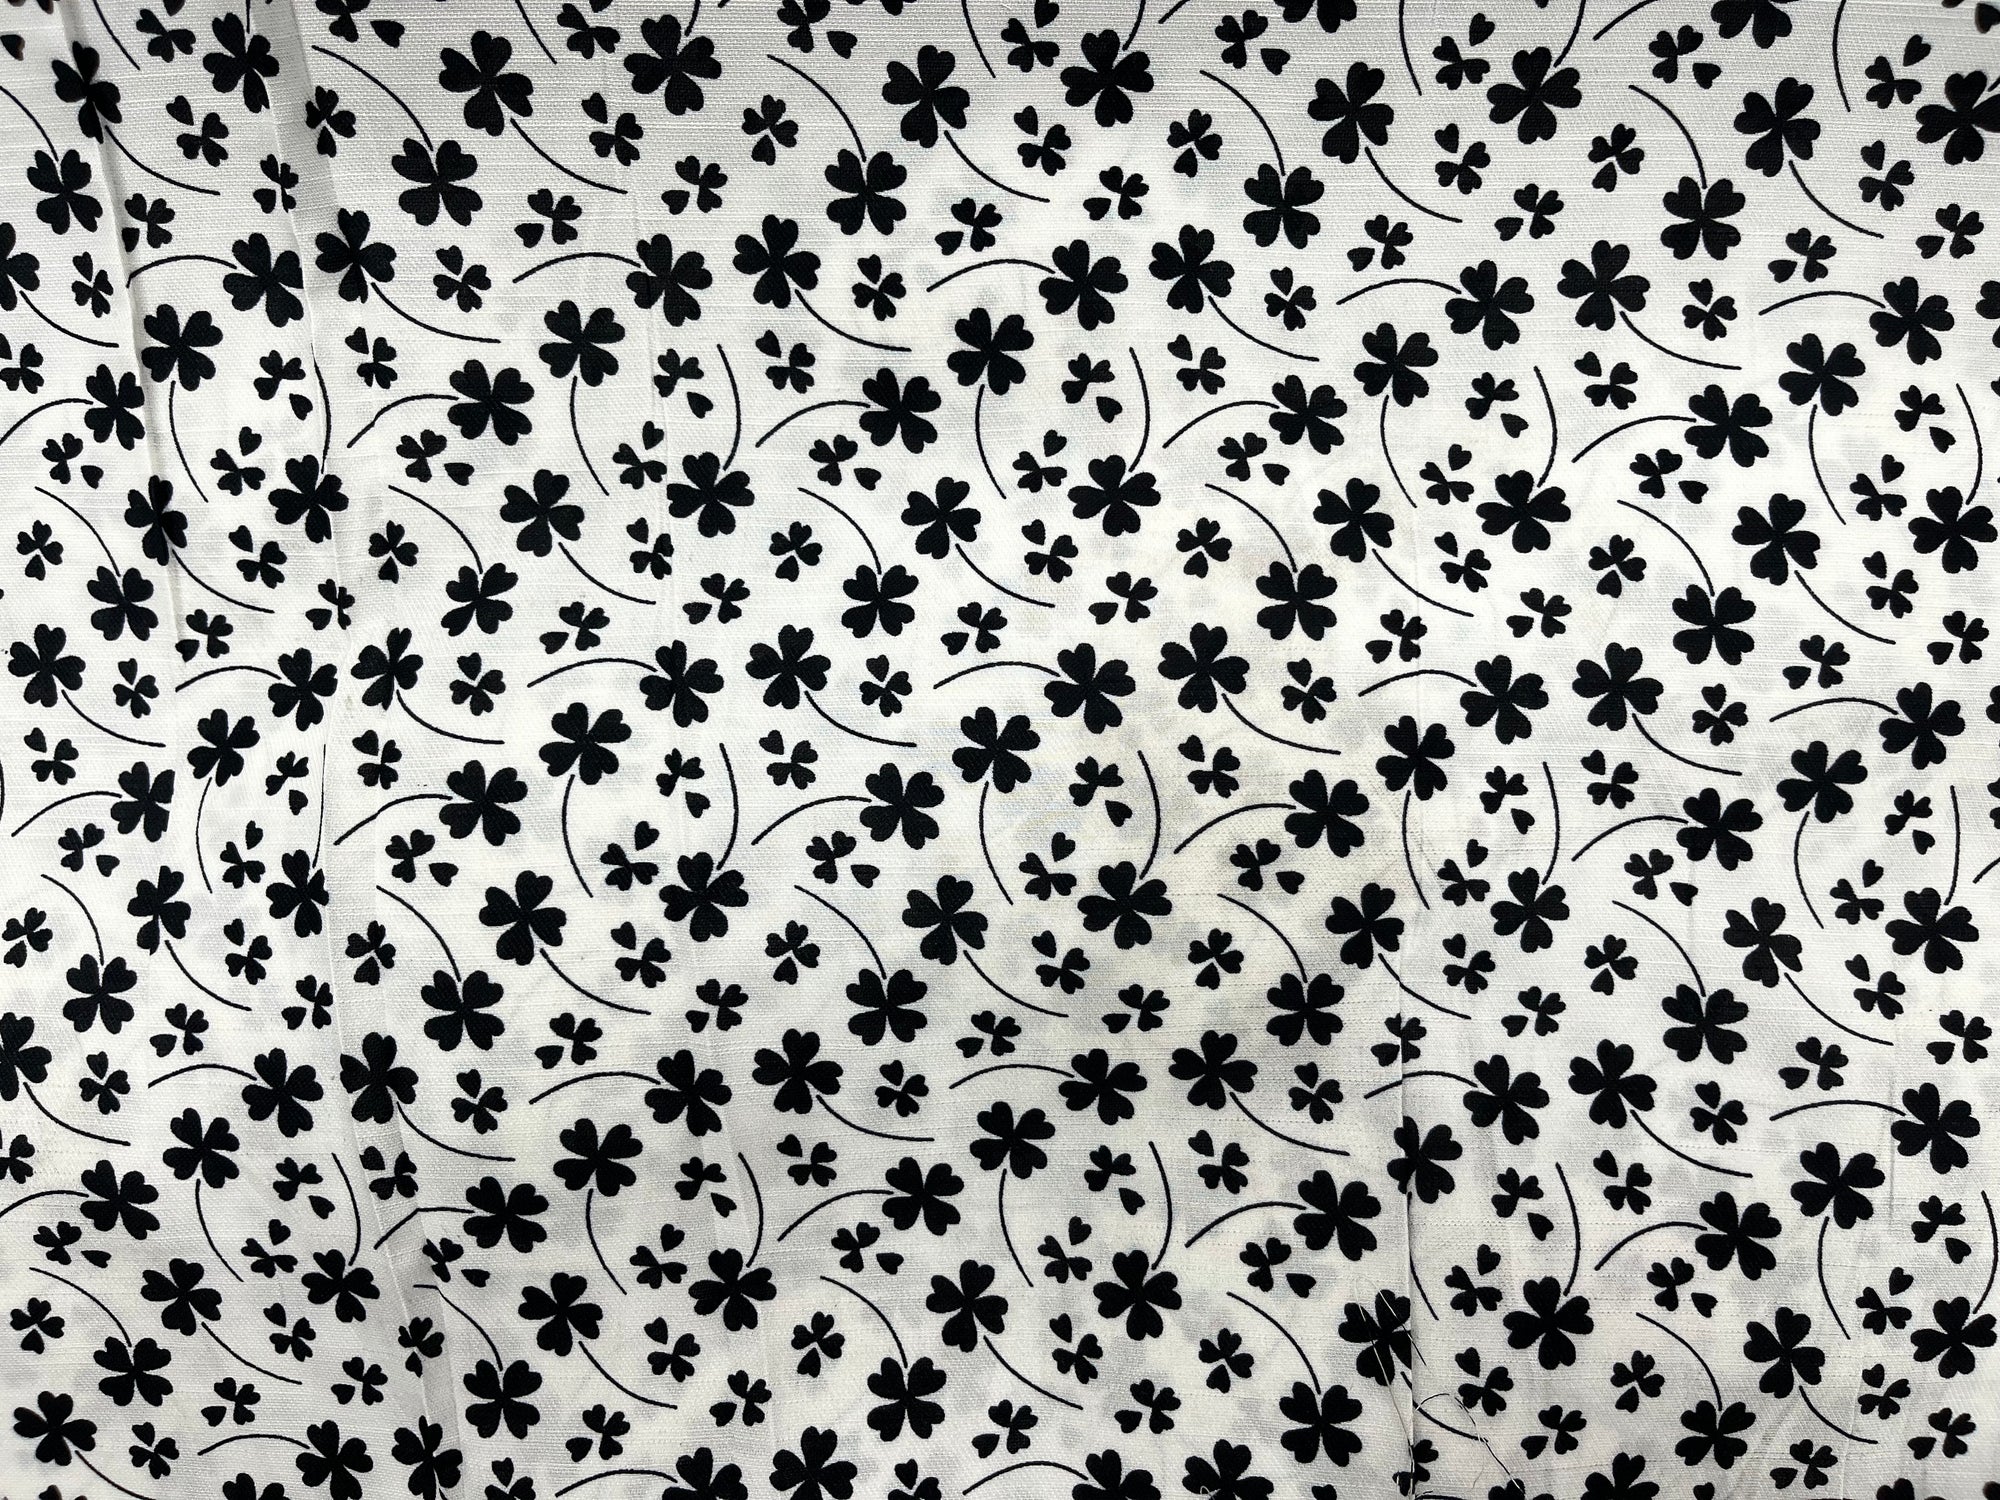 Black White Daisy - Clearance Printed Crepe Fabric